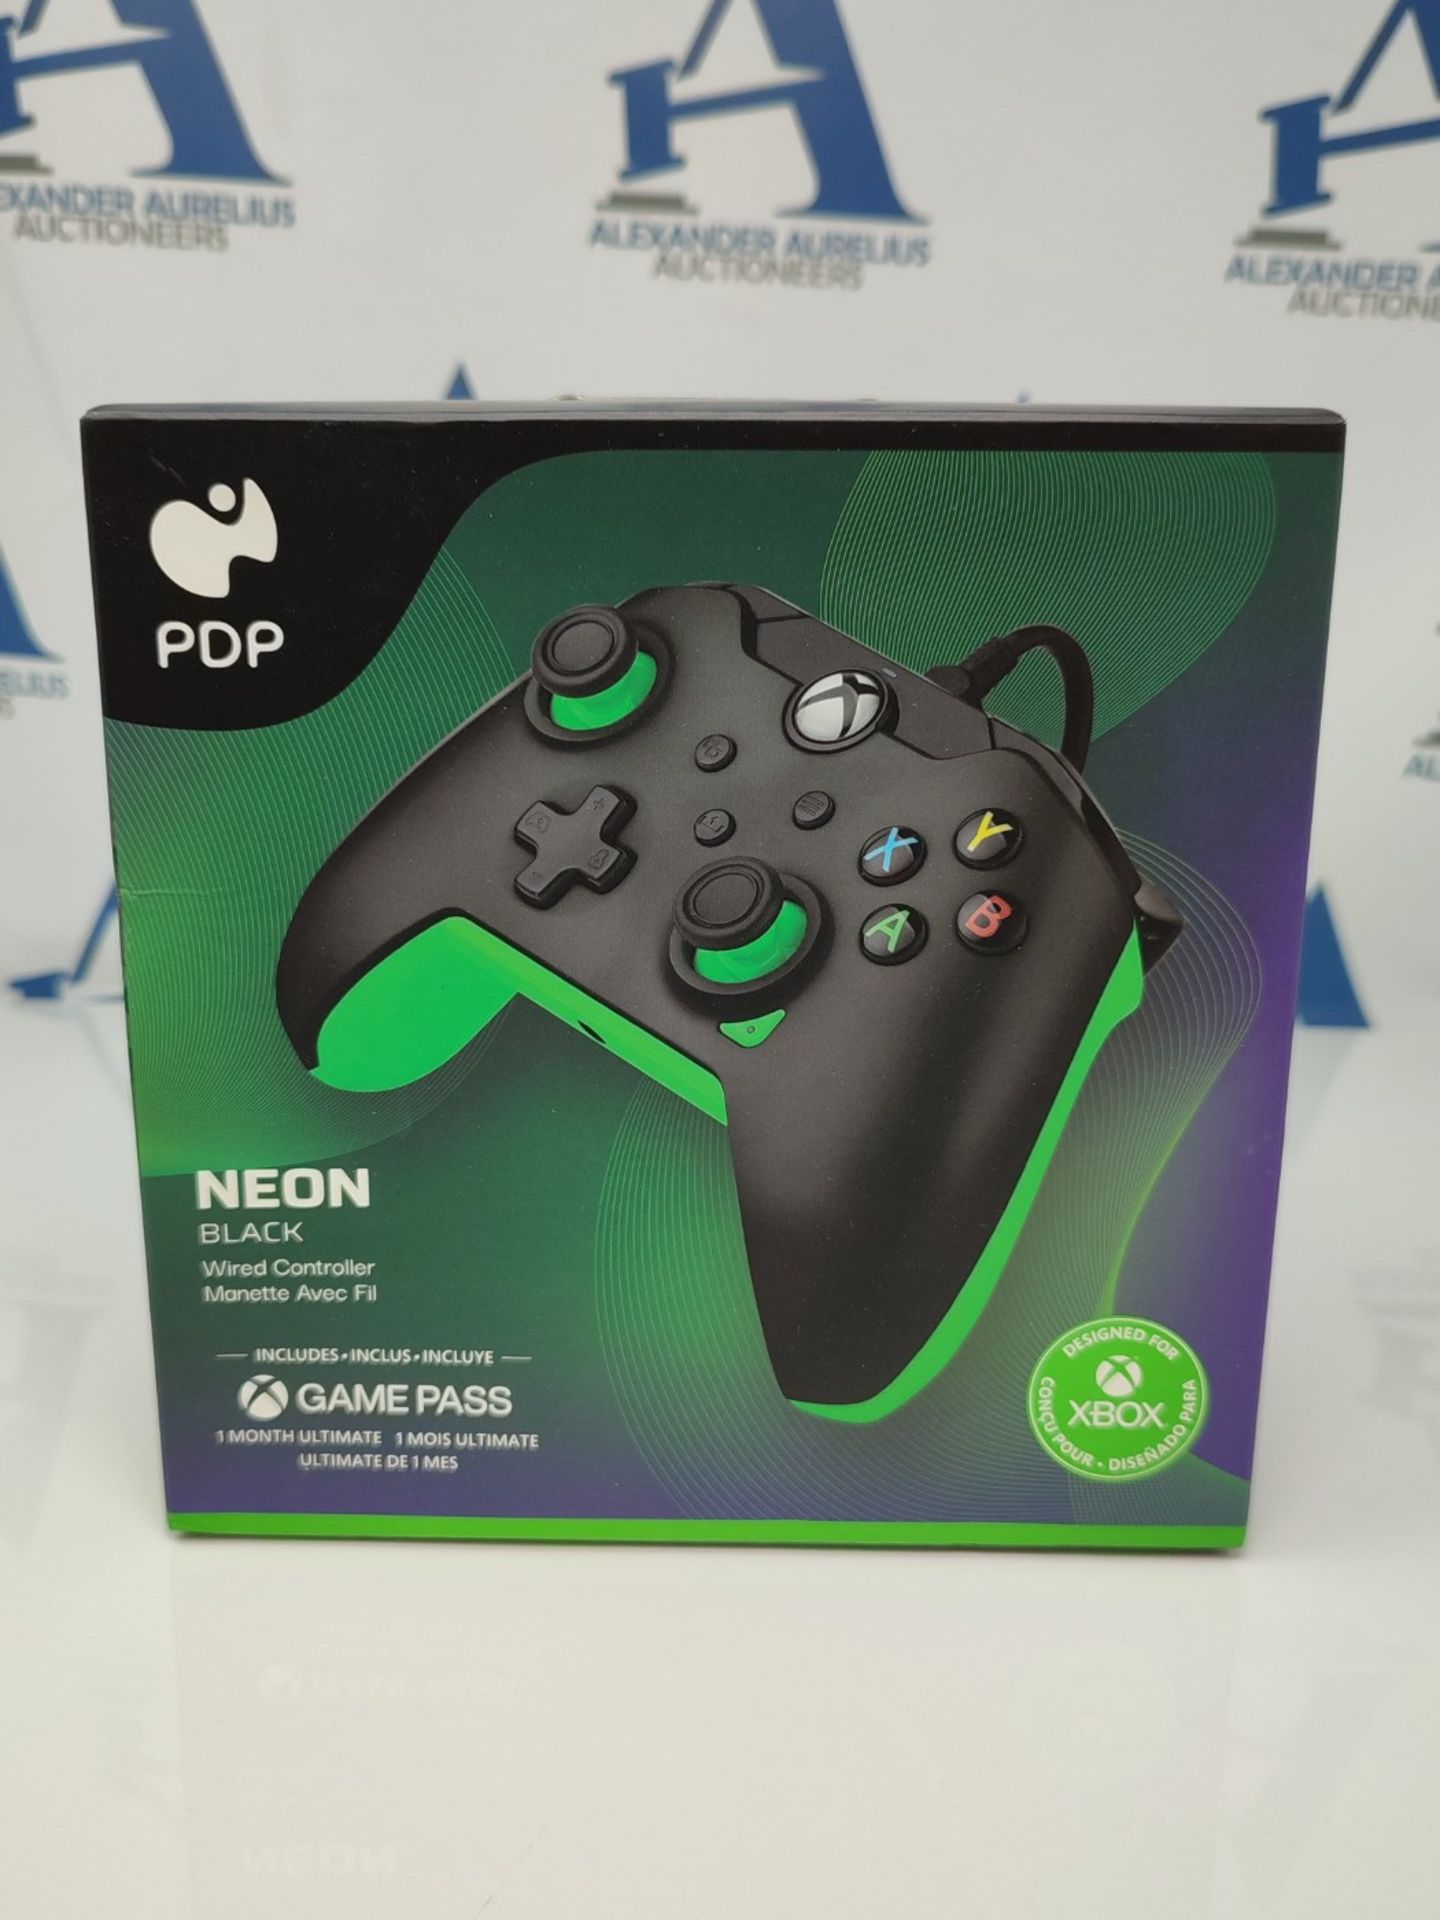 PDP Wired controller Neon Black for Xbox Series X|S, Gamepad, Wired Video Game control - Image 2 of 3